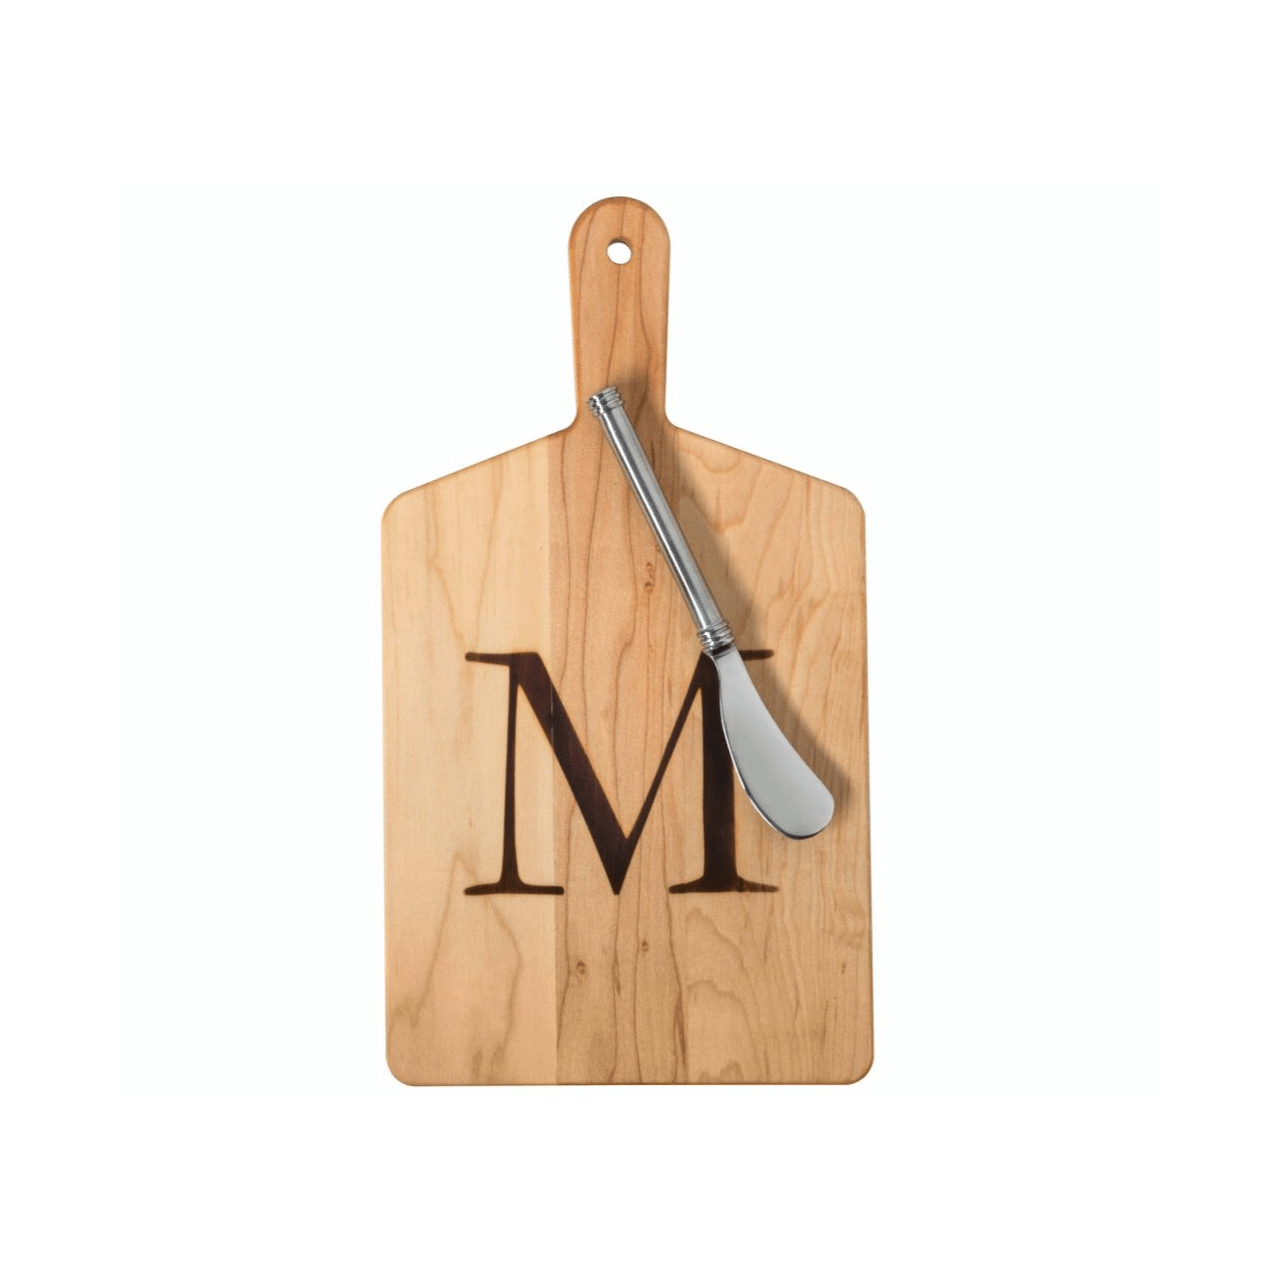 Maple Cheese Board with a Stamped H and Metal Spreader